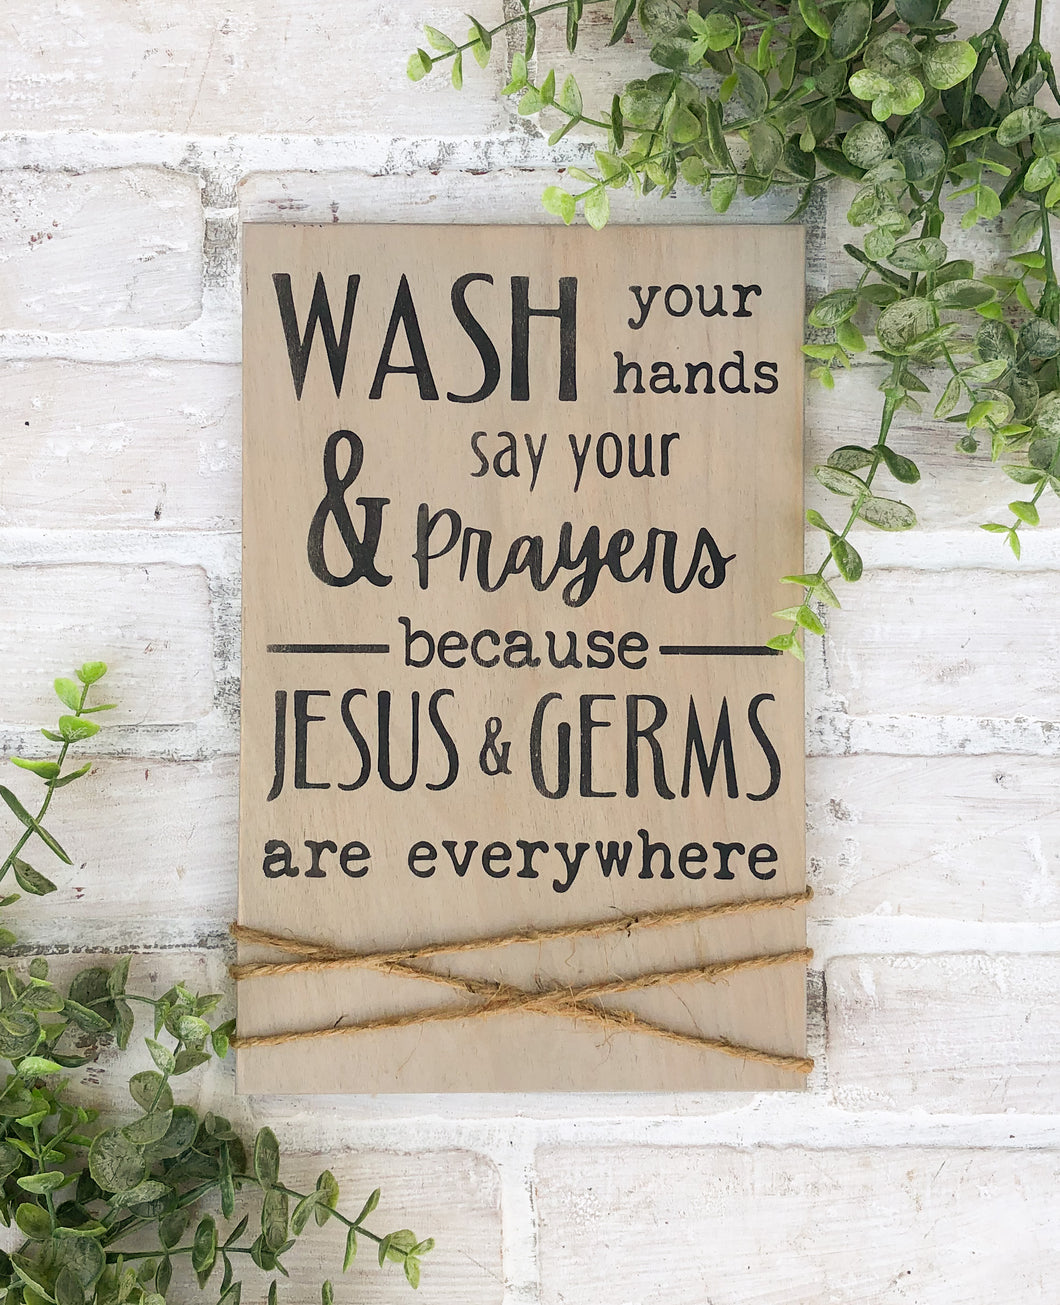 Wash Your Hands & Say Your Prayers Because Jesus & Germs Are Everywhere - Religious - Kitchen Sign - Bathroom Decor